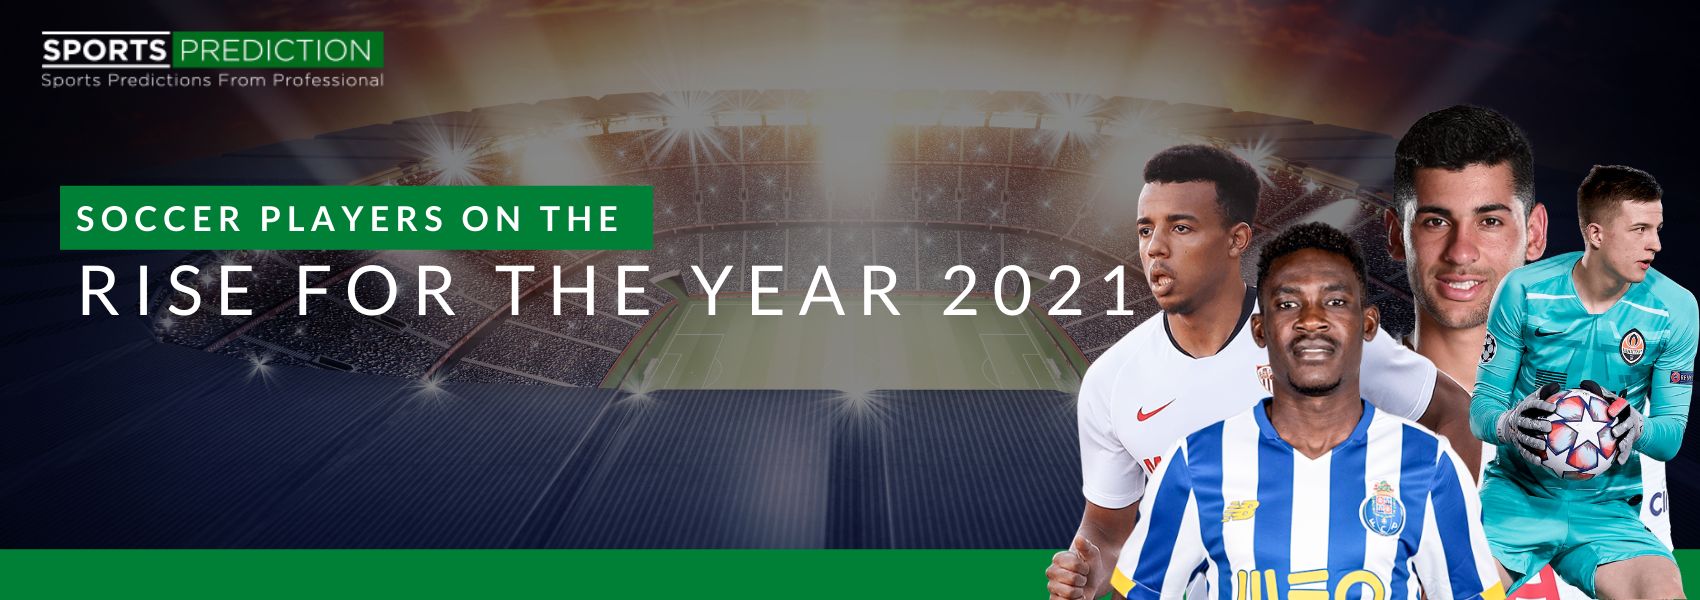 Soccer Players On The Rise For The Year 2021